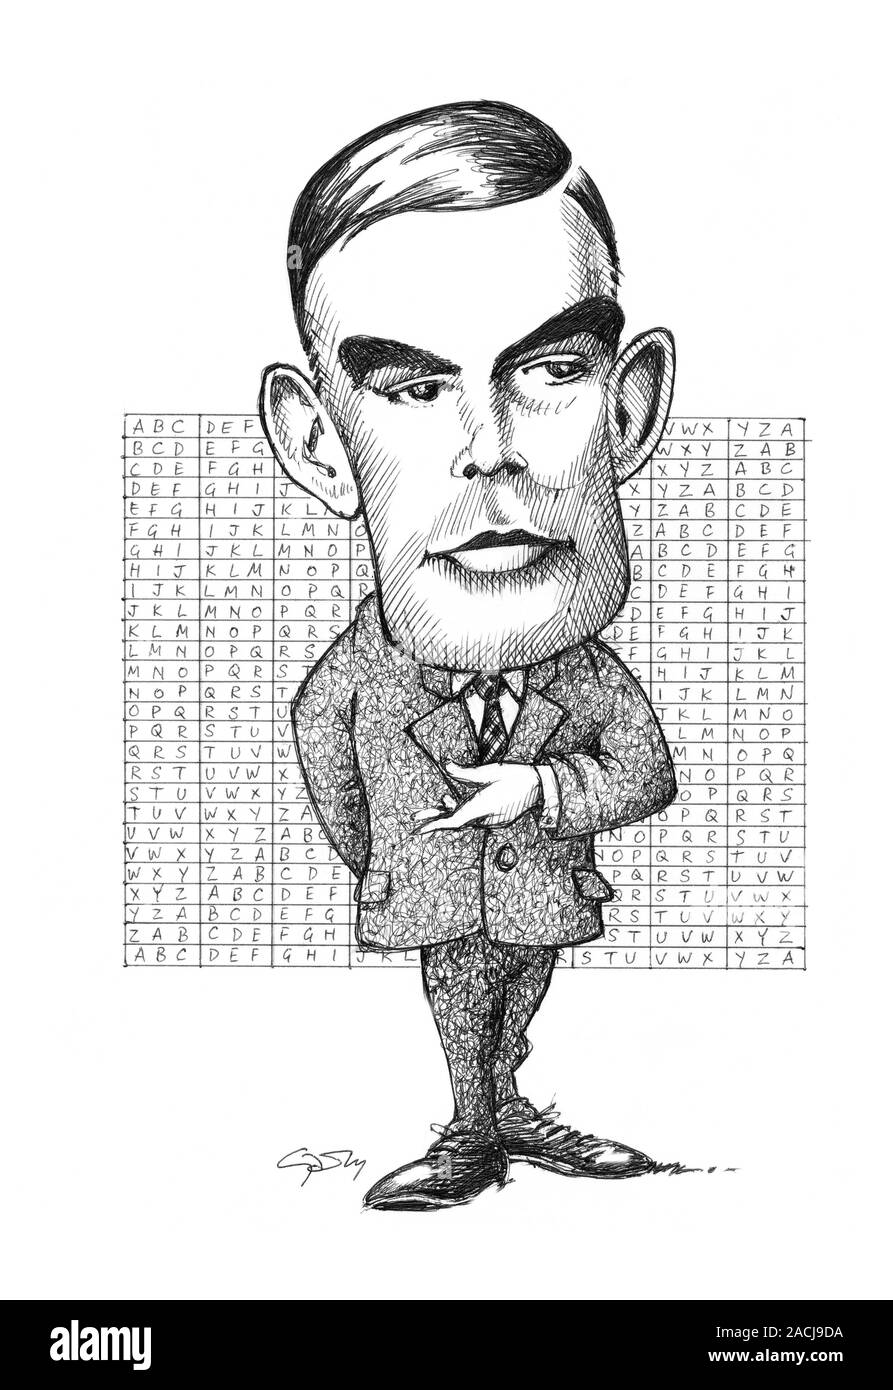 Alan Turing. Caricature of the British mathematician Alan Turing (1912-54).  In 1937 Turing described a theoretical computer (a Turing machine) in rigo  Stock Photo - Alamy